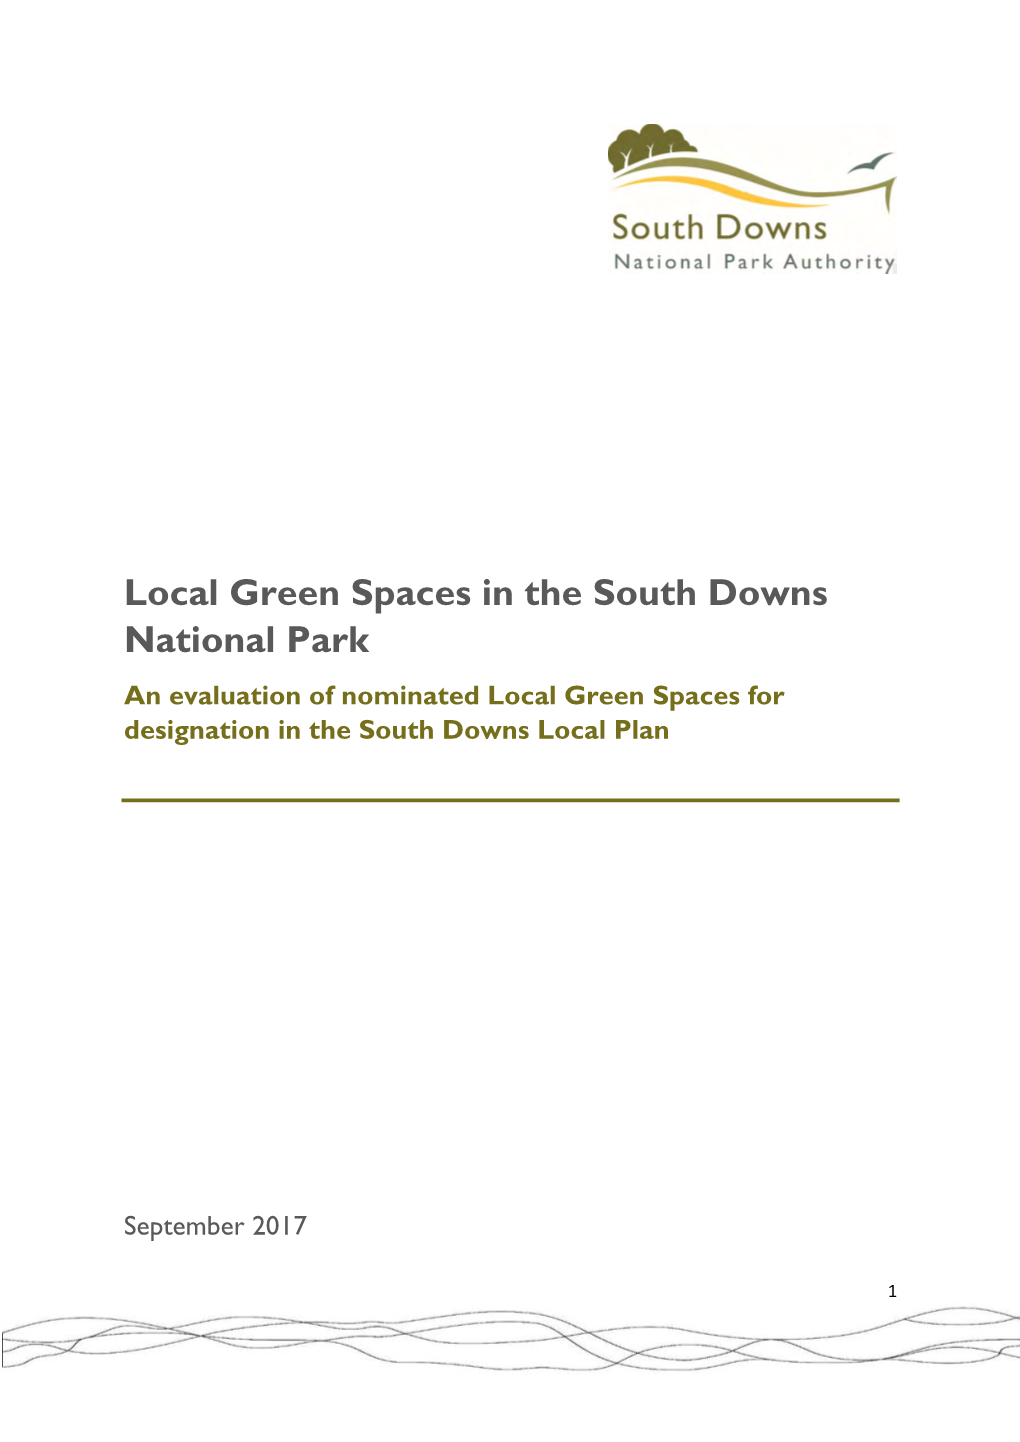 Local Green Spaces in the South Downs National Park (2017)